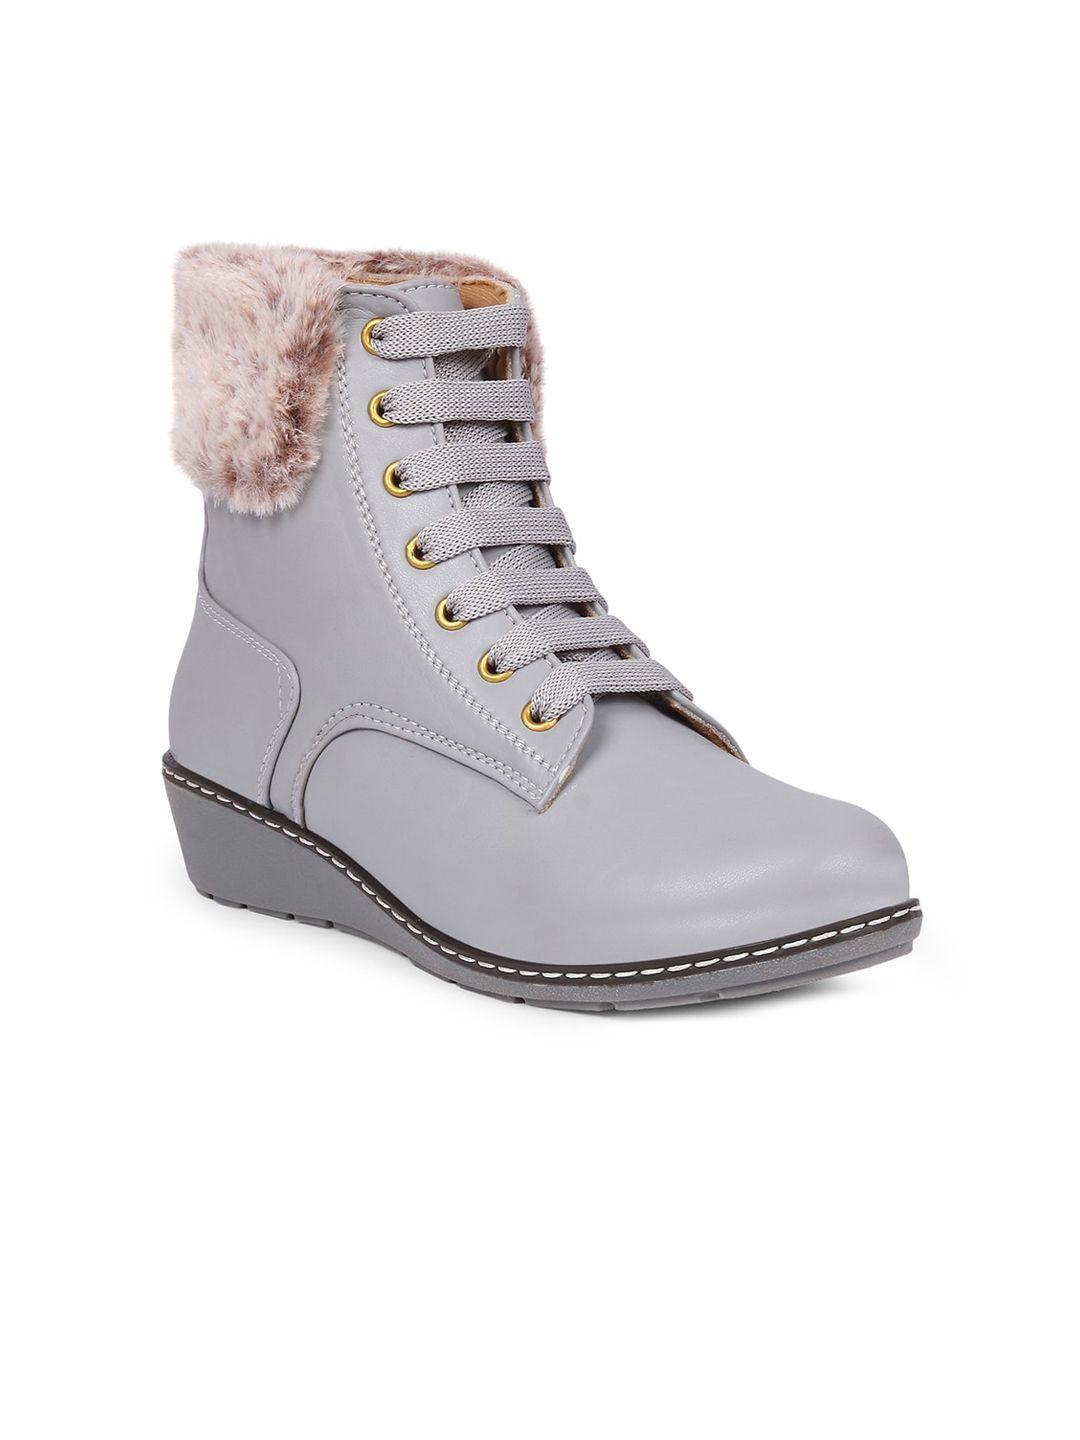 the roadster lifestyle co. women heeled faux fur trim mid-top chunky boots